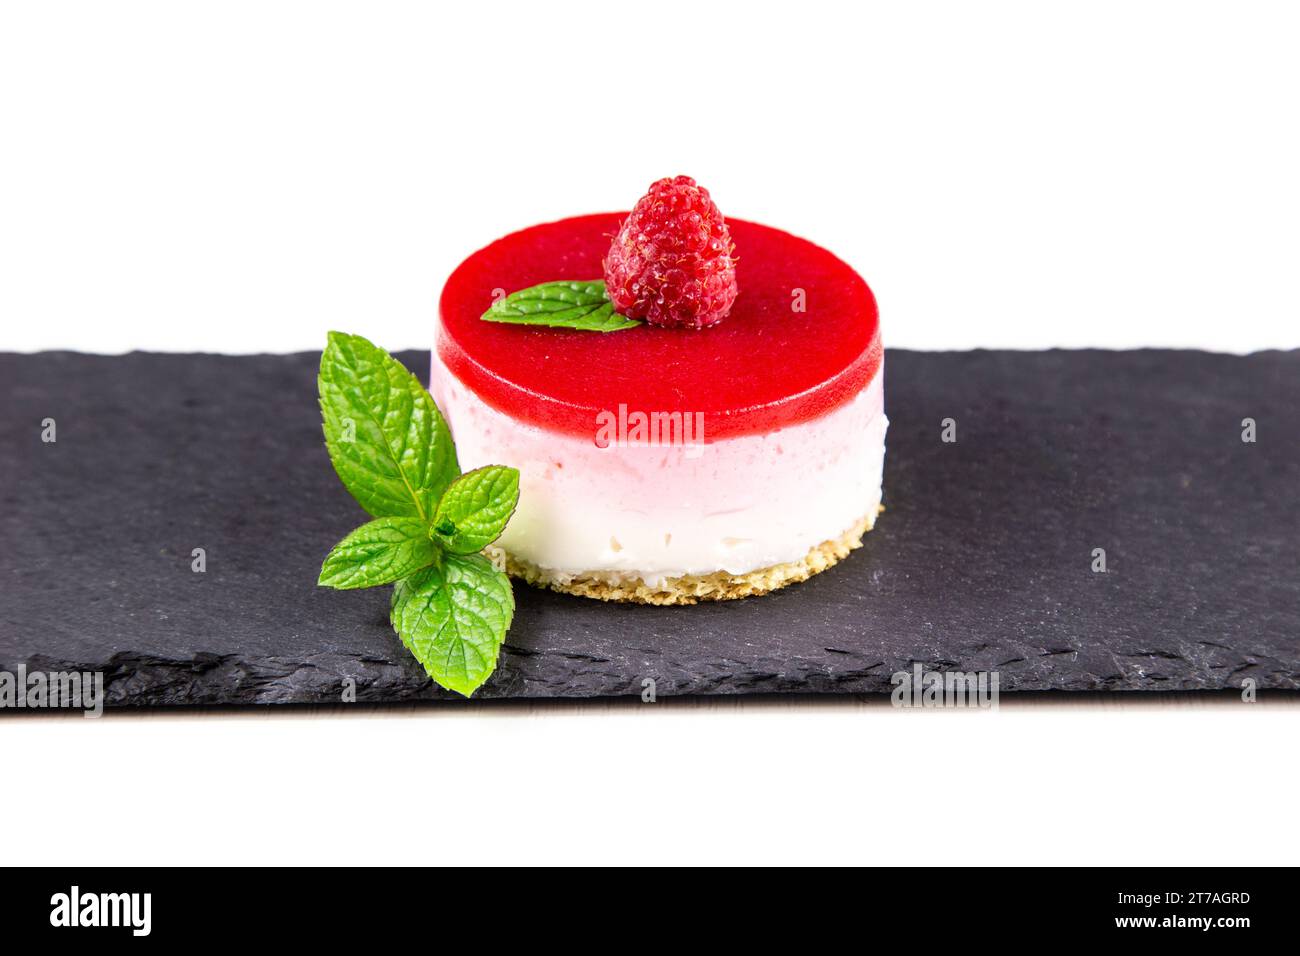 A delicious raspberry cheesecake with fresh raspberries and mint leaves on a black slate plate. Stock Photo